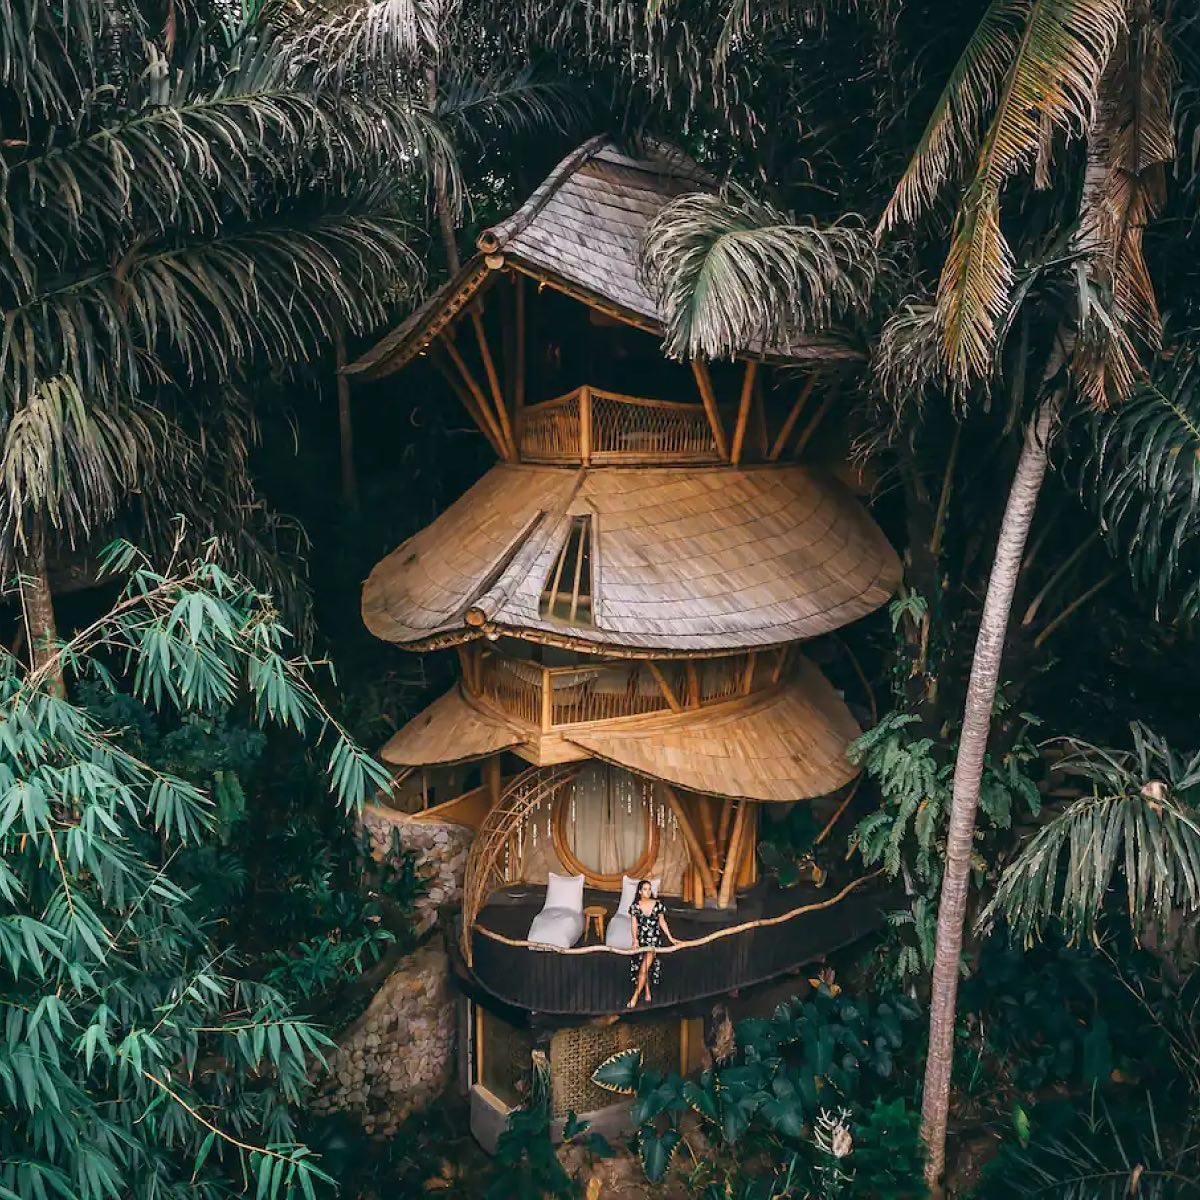 Aerial view of a four-storey tree house nestled among the trees in Bali, with a woman on the balcony